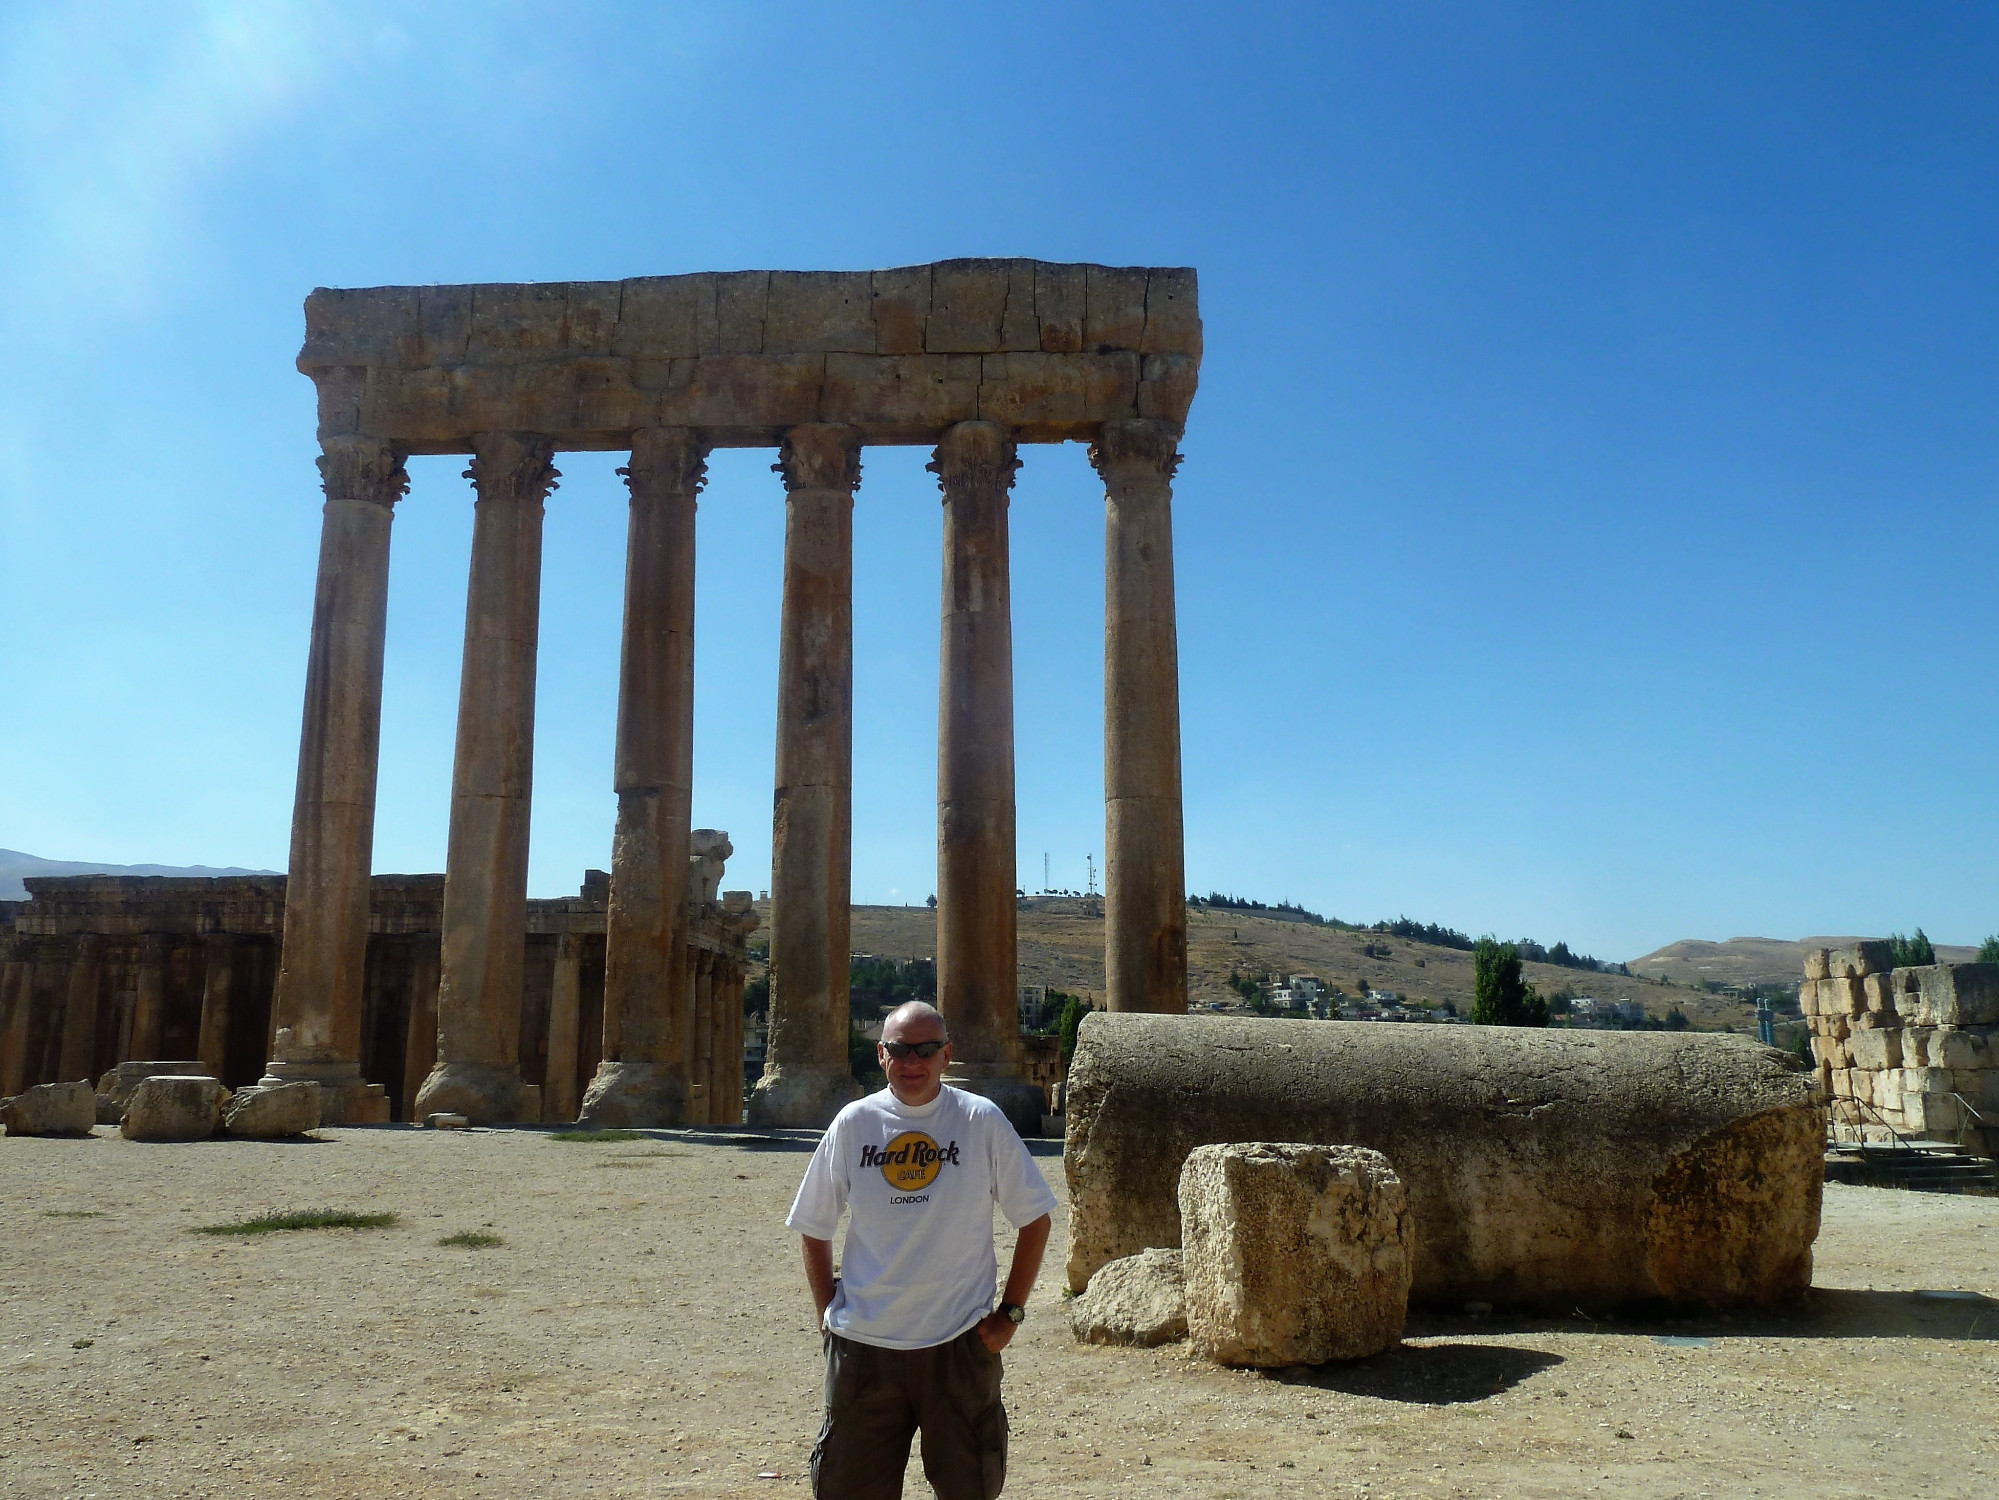 Moi in front of last Columns Temple of Jupiter